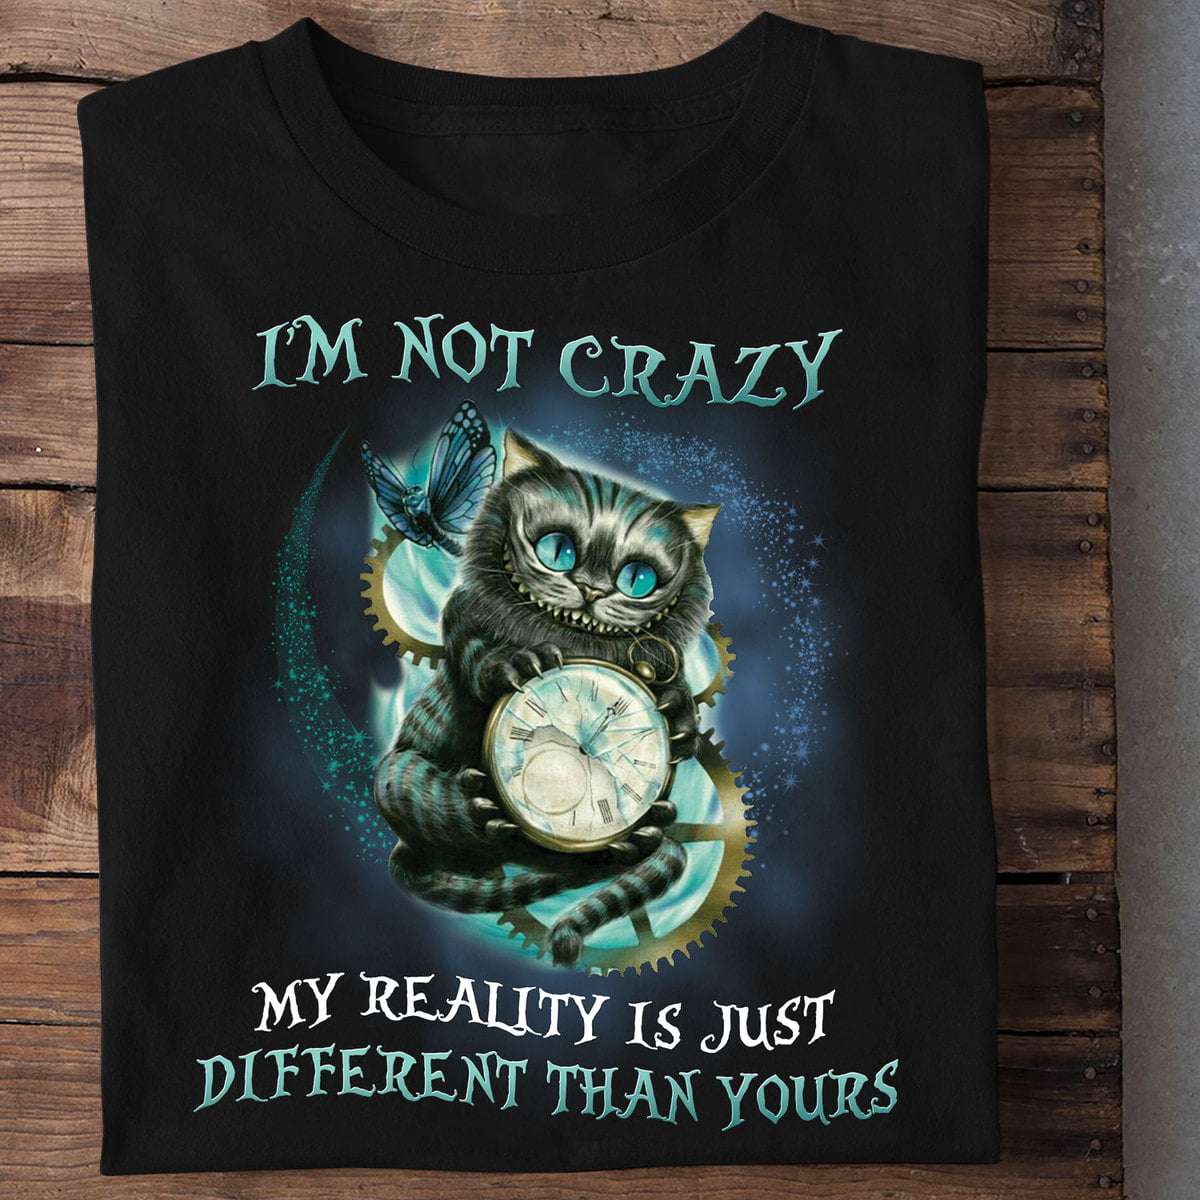 I'm not crazy my reality is just different than yours - Chesire cat, Alice in the wonderland